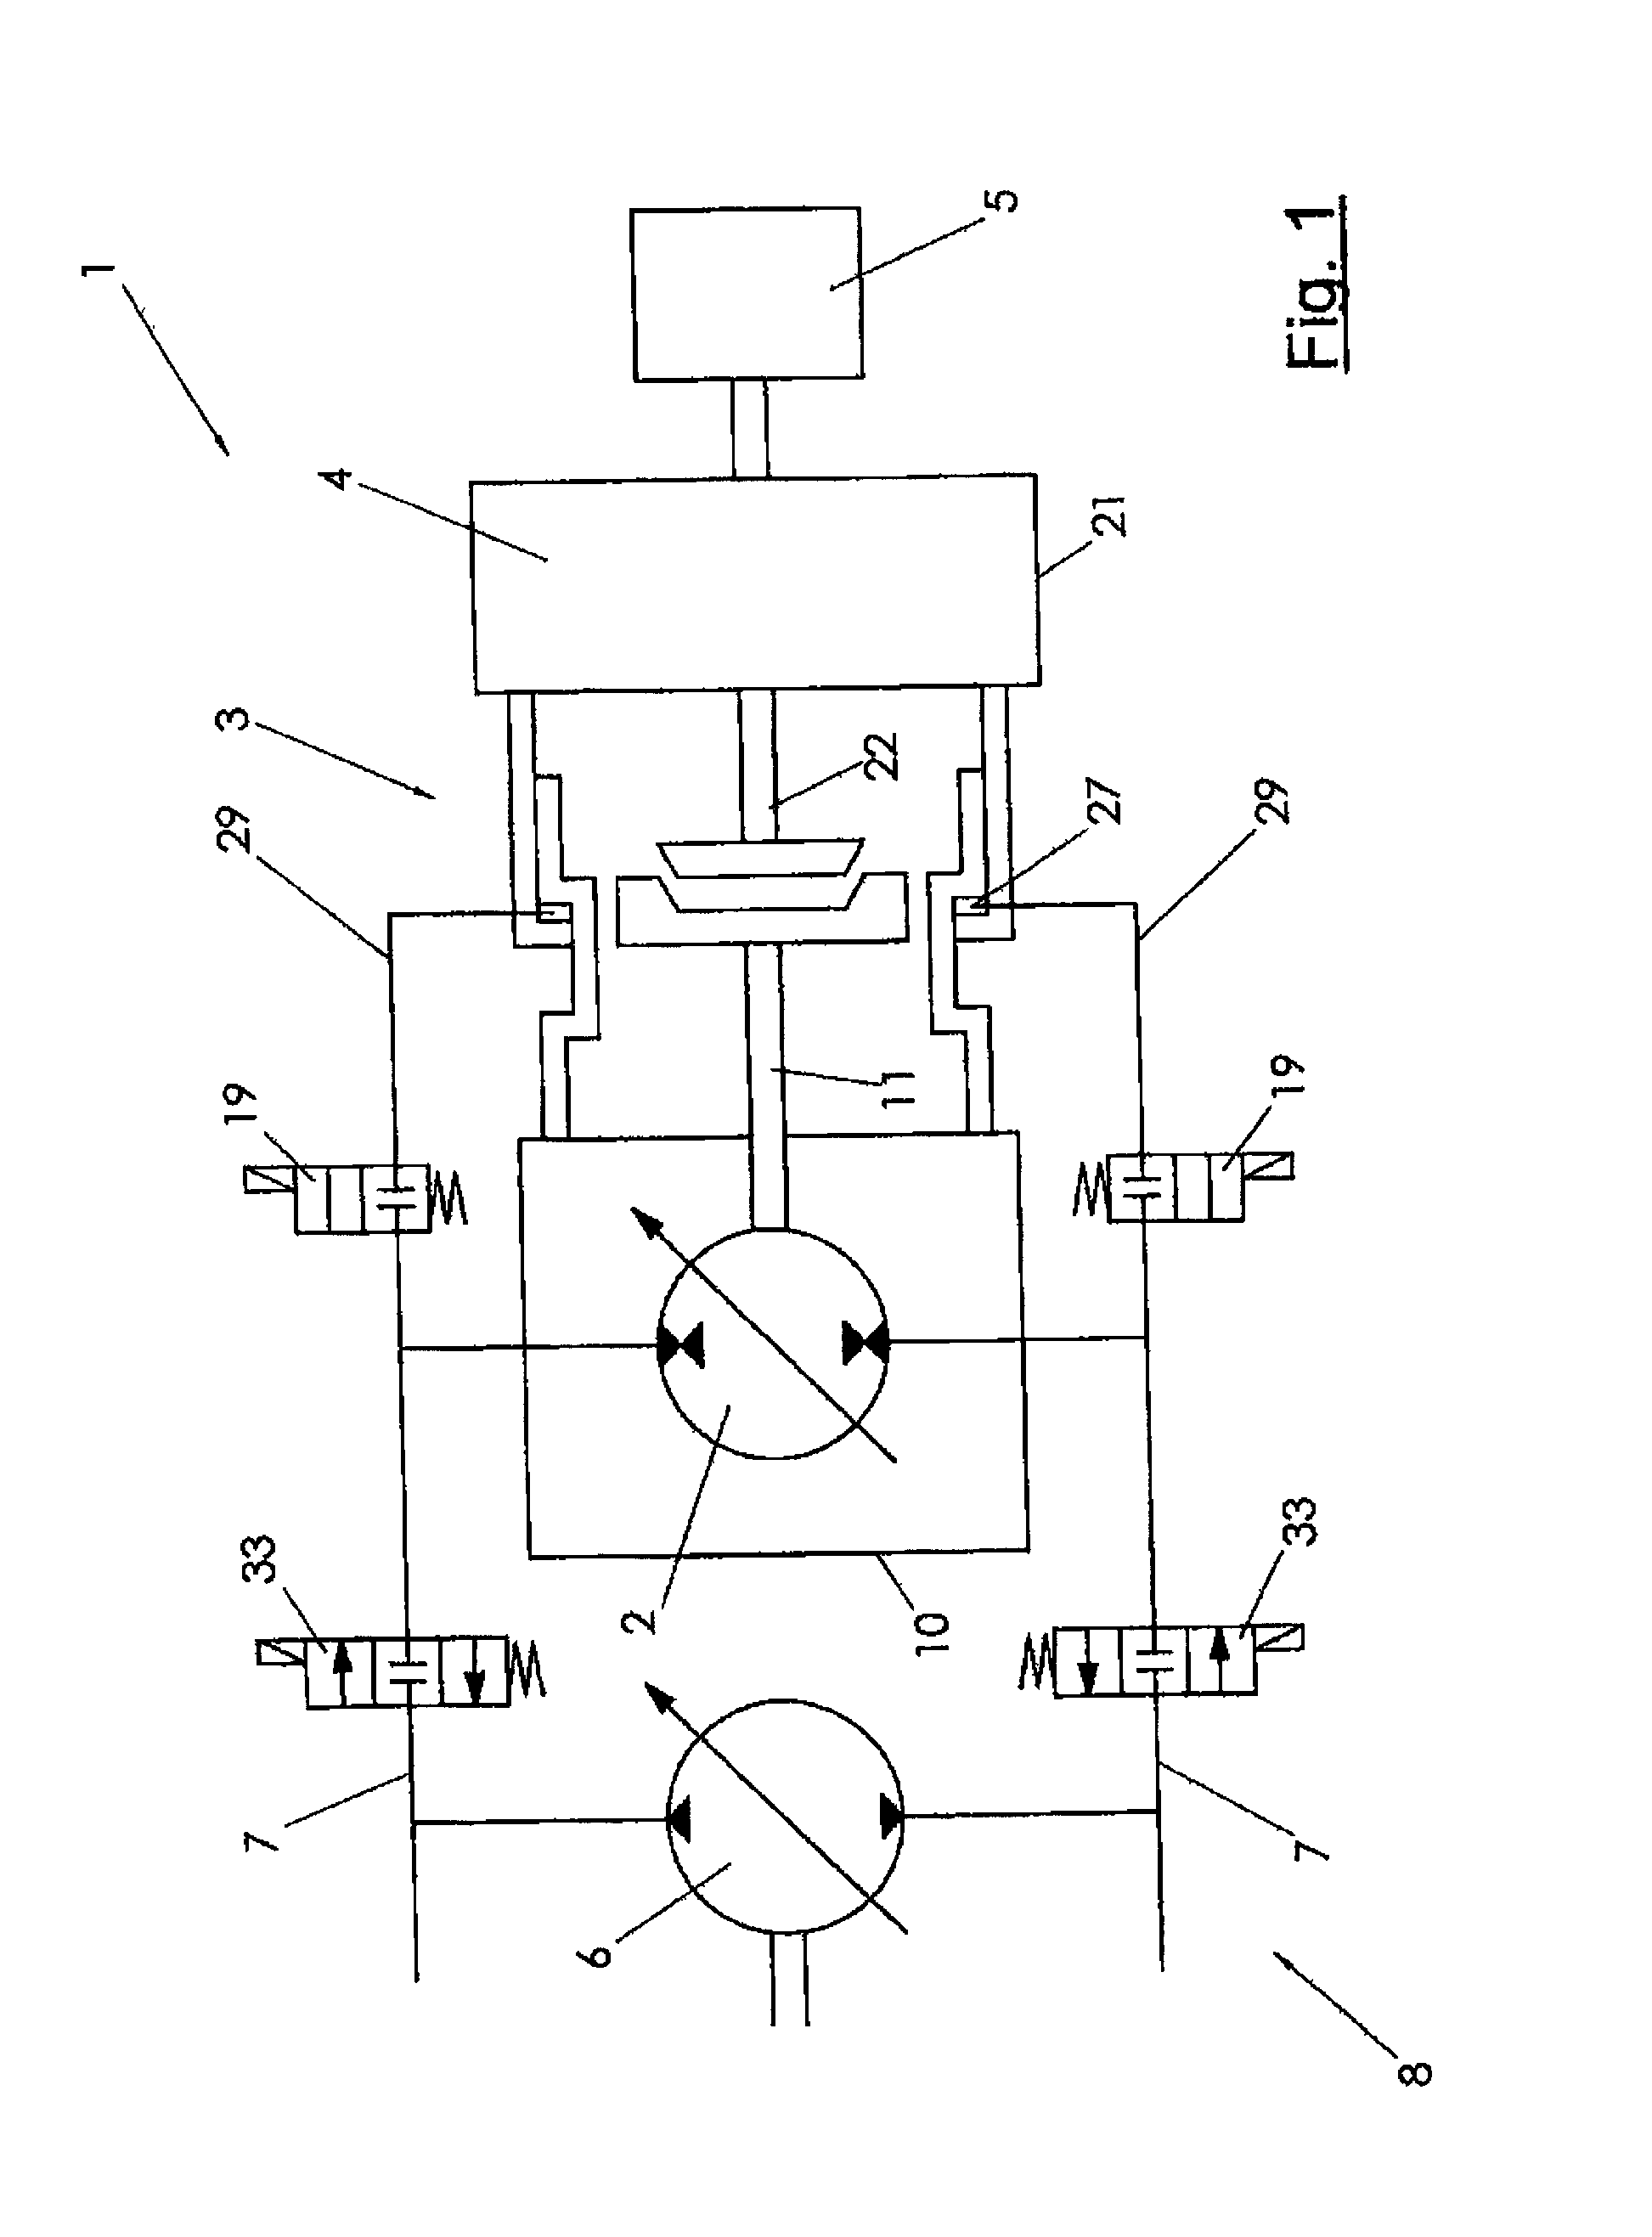 Axial coupling with compensated forces